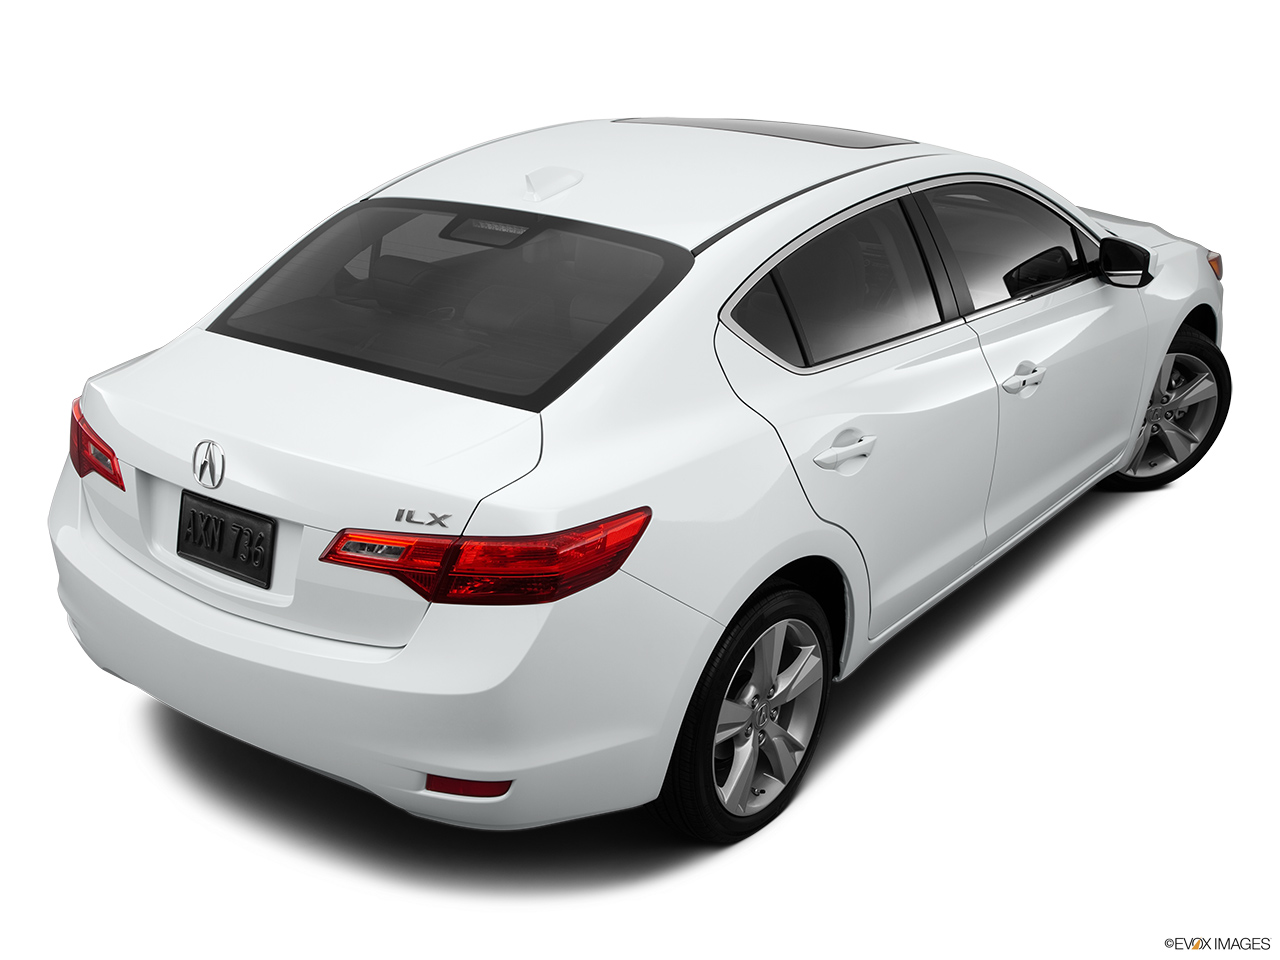 2015 Acura ILX 6-Speed Manual Rear 3/4 angle view. 